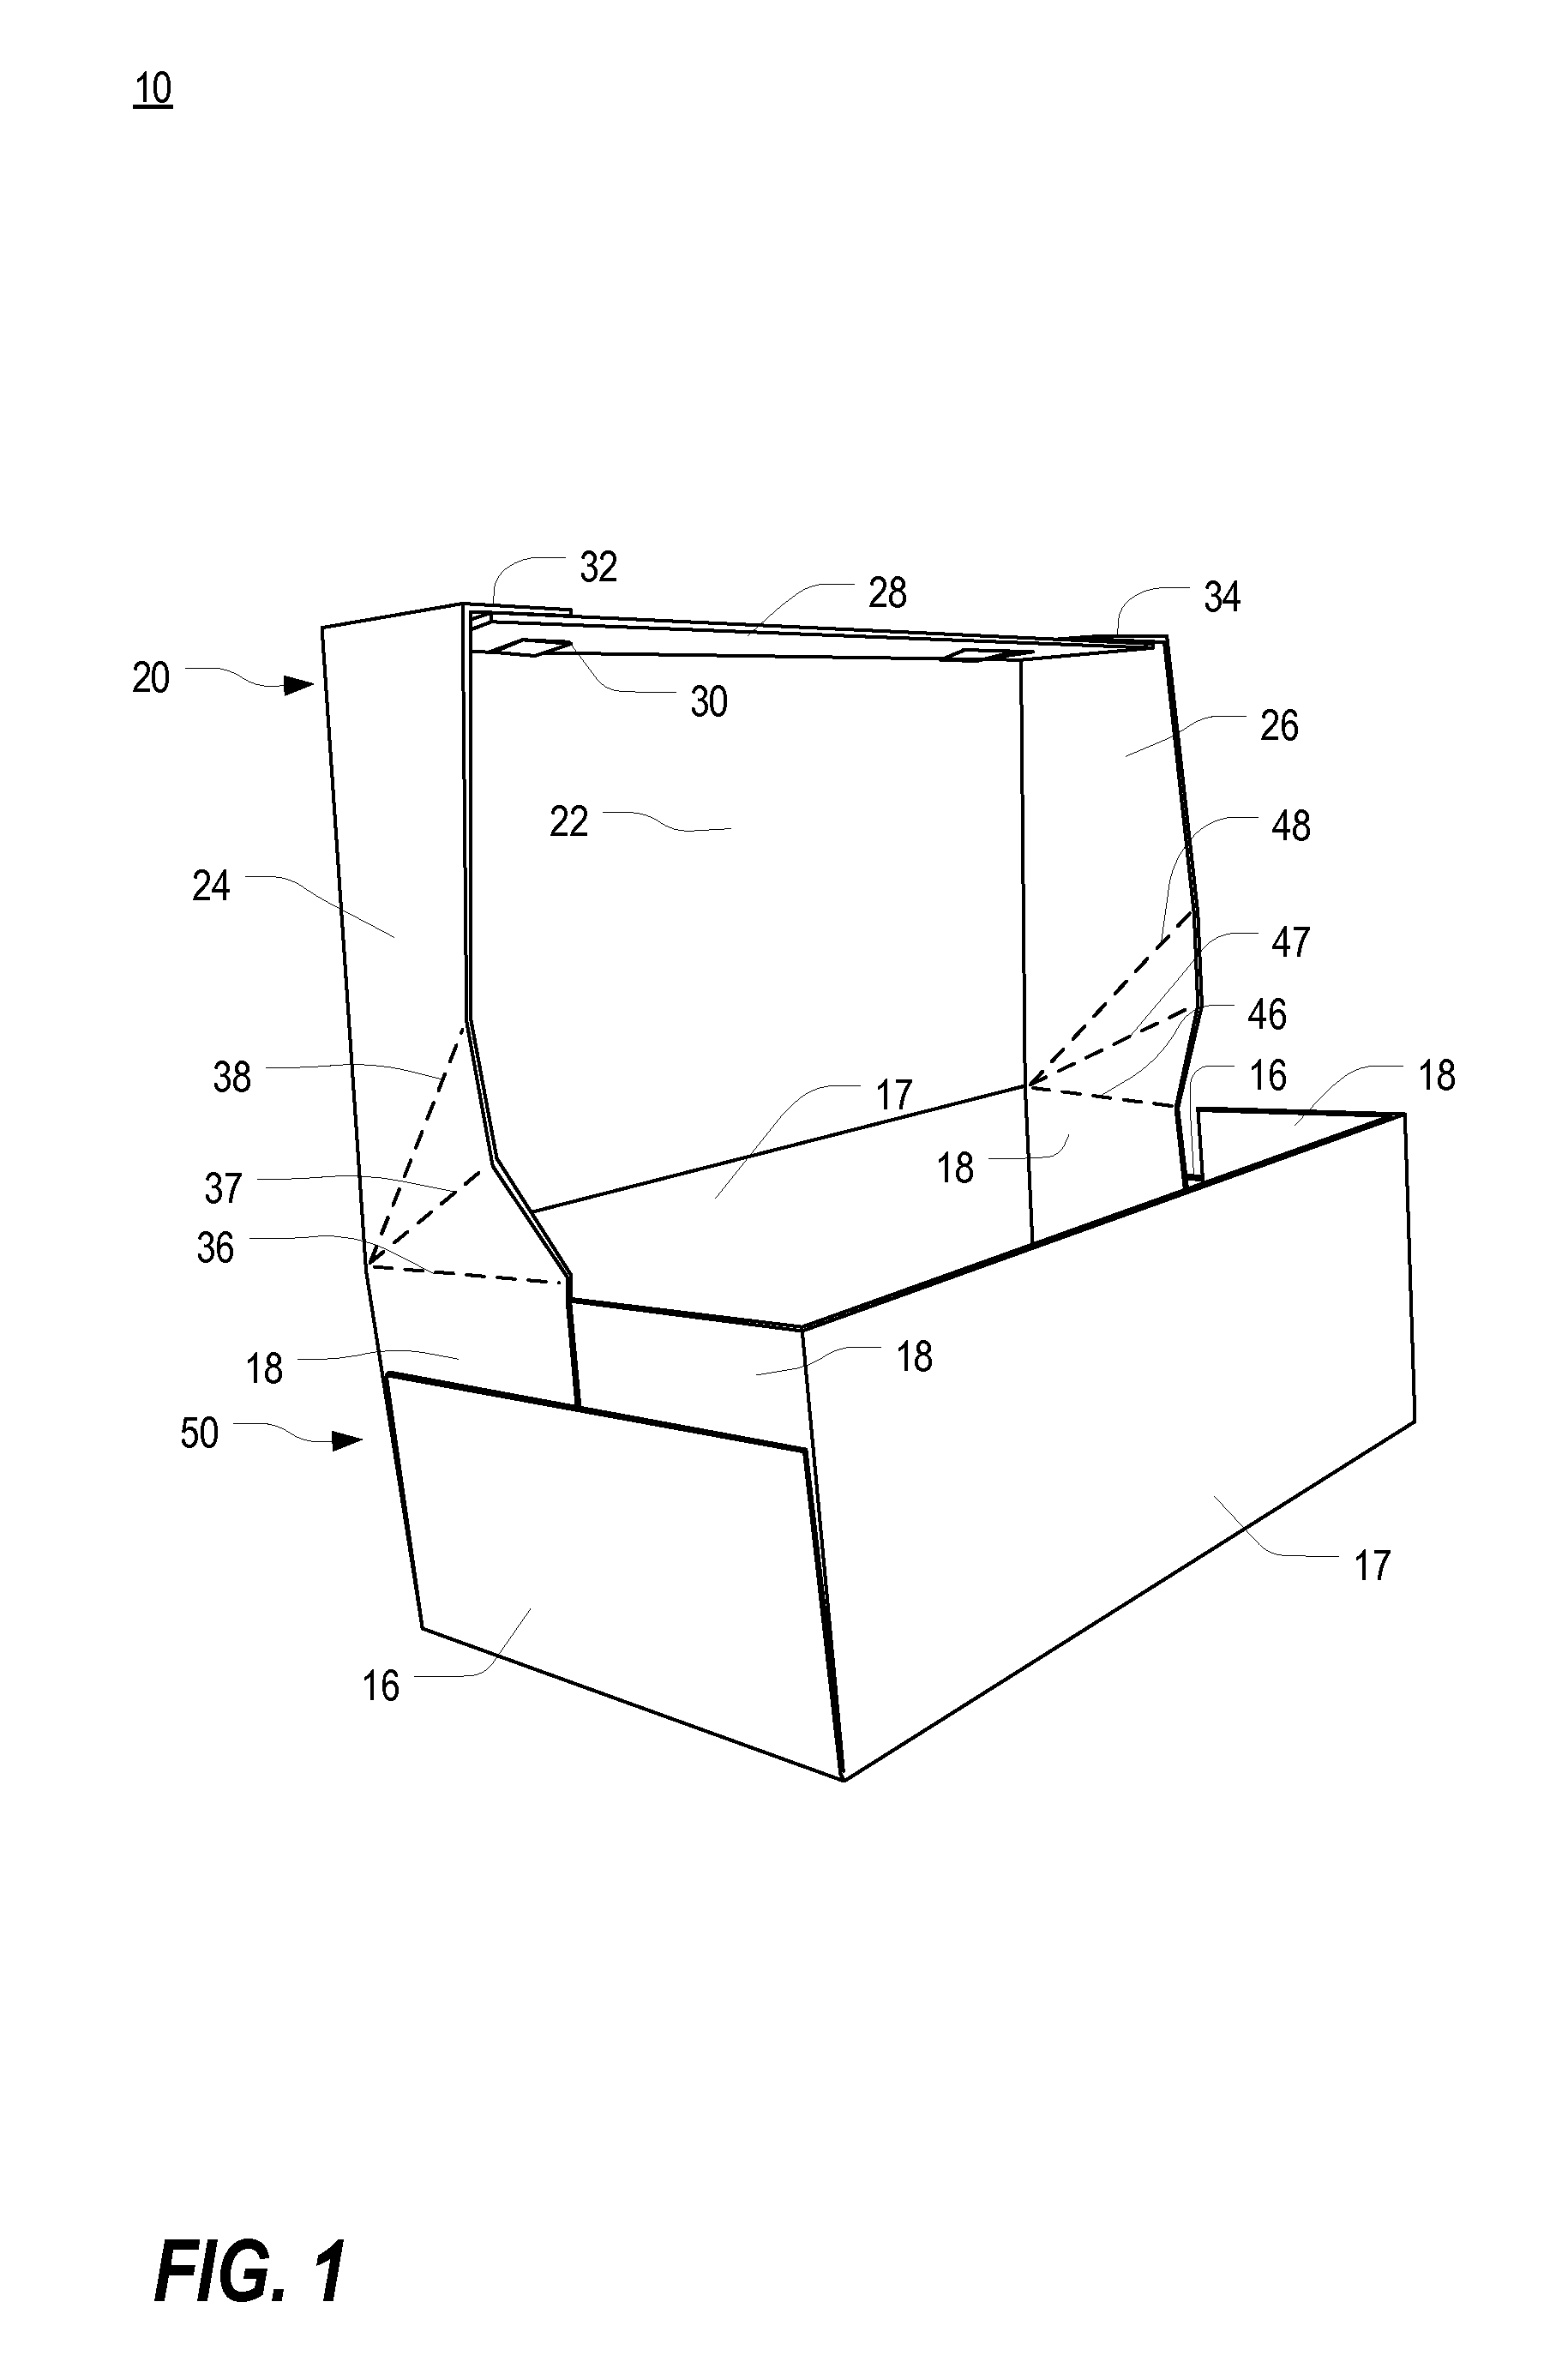 One-piece box with integrally connected lid